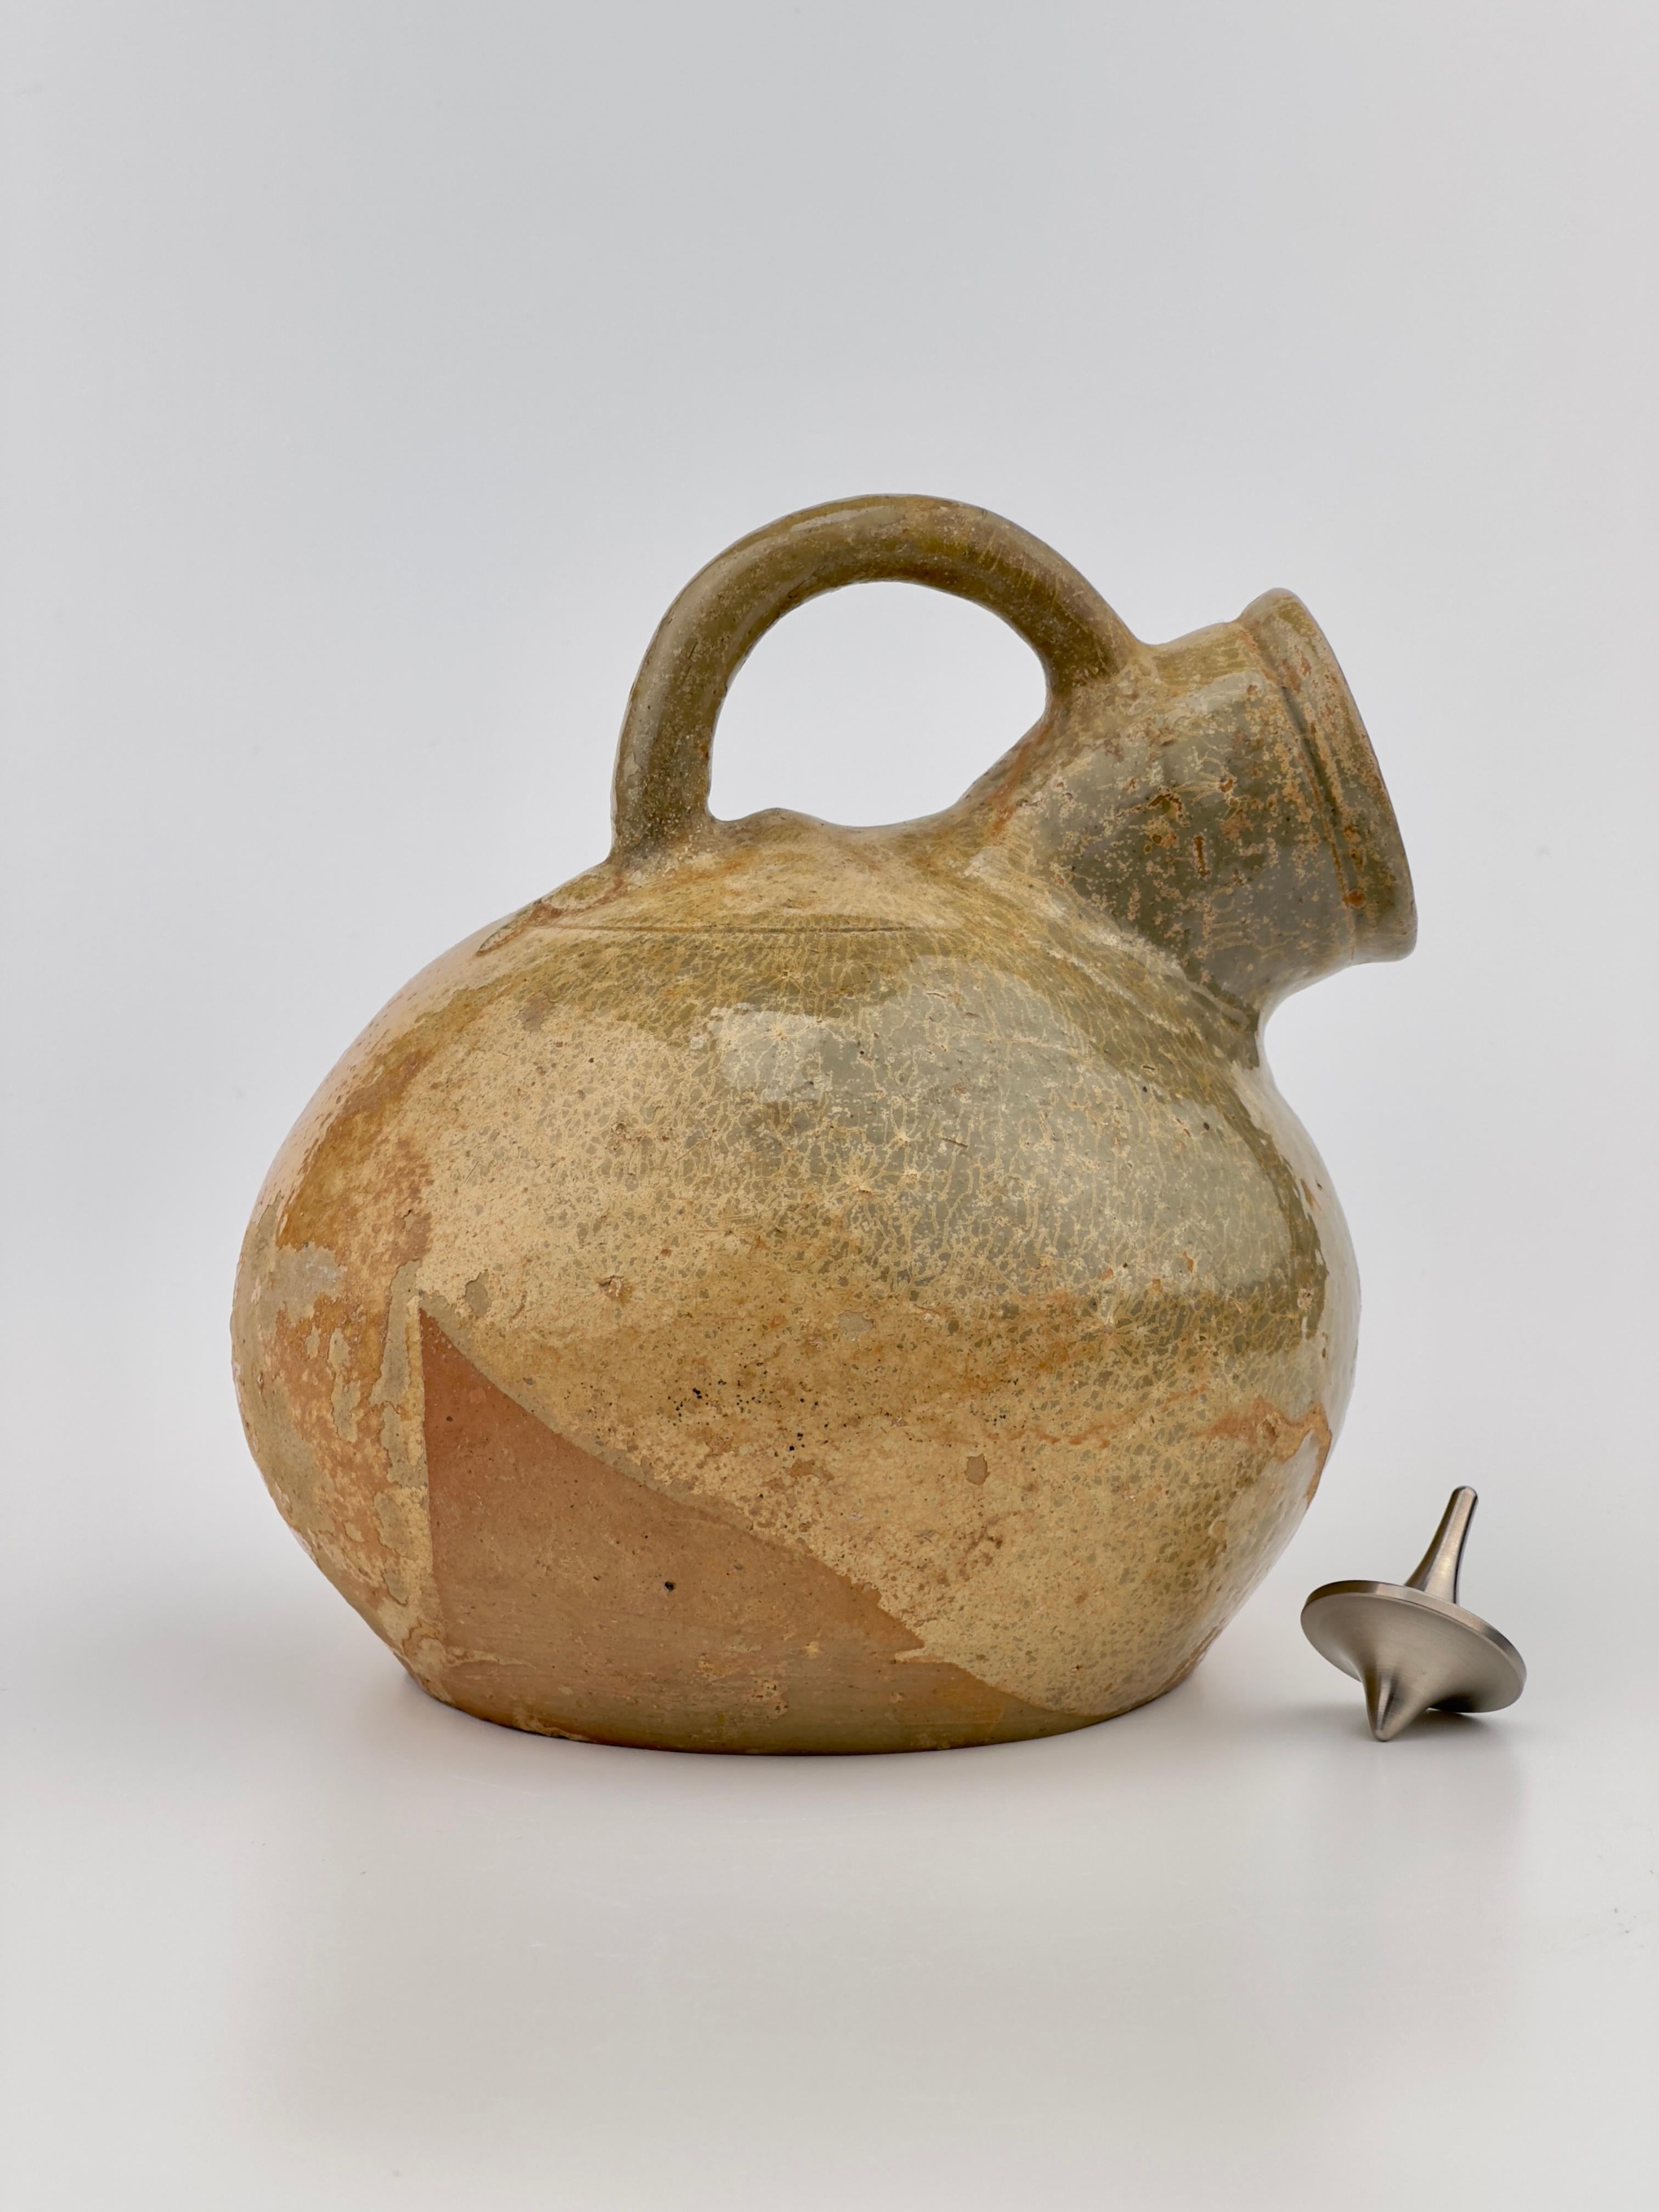 A Yue celadon vessel from the Jin Dynasty period, notable for its characteristic greenish-glazed pottery which was prominent during this time. The vessel features a globular body with a single looped handle that arches gracefully from the shoulder